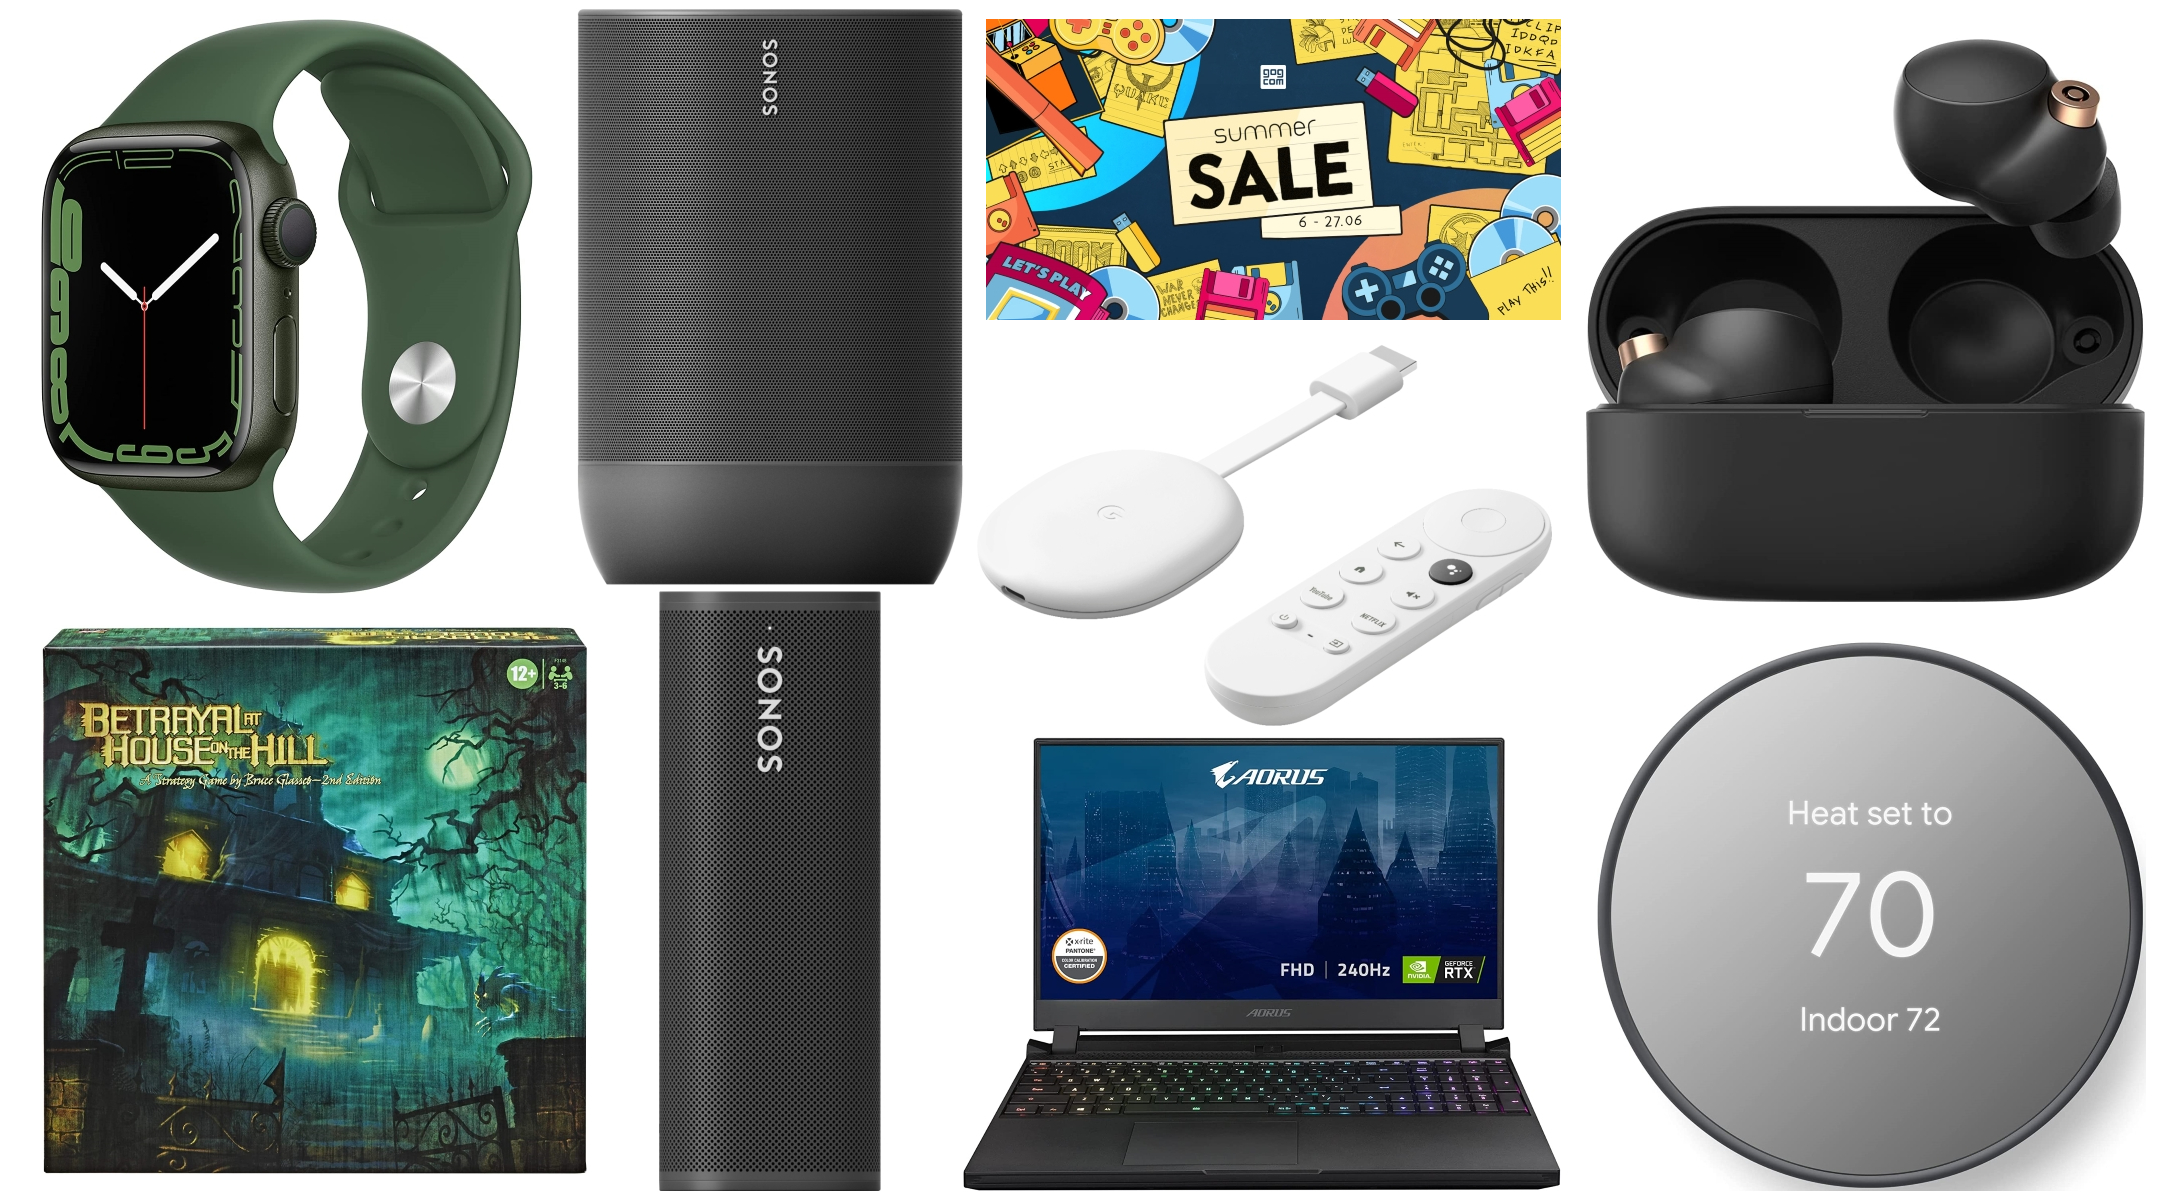 Megalopolis tyveri thespian Today's best deals: Sonos speakers, Google Chromecast, and more | Ars  Technica